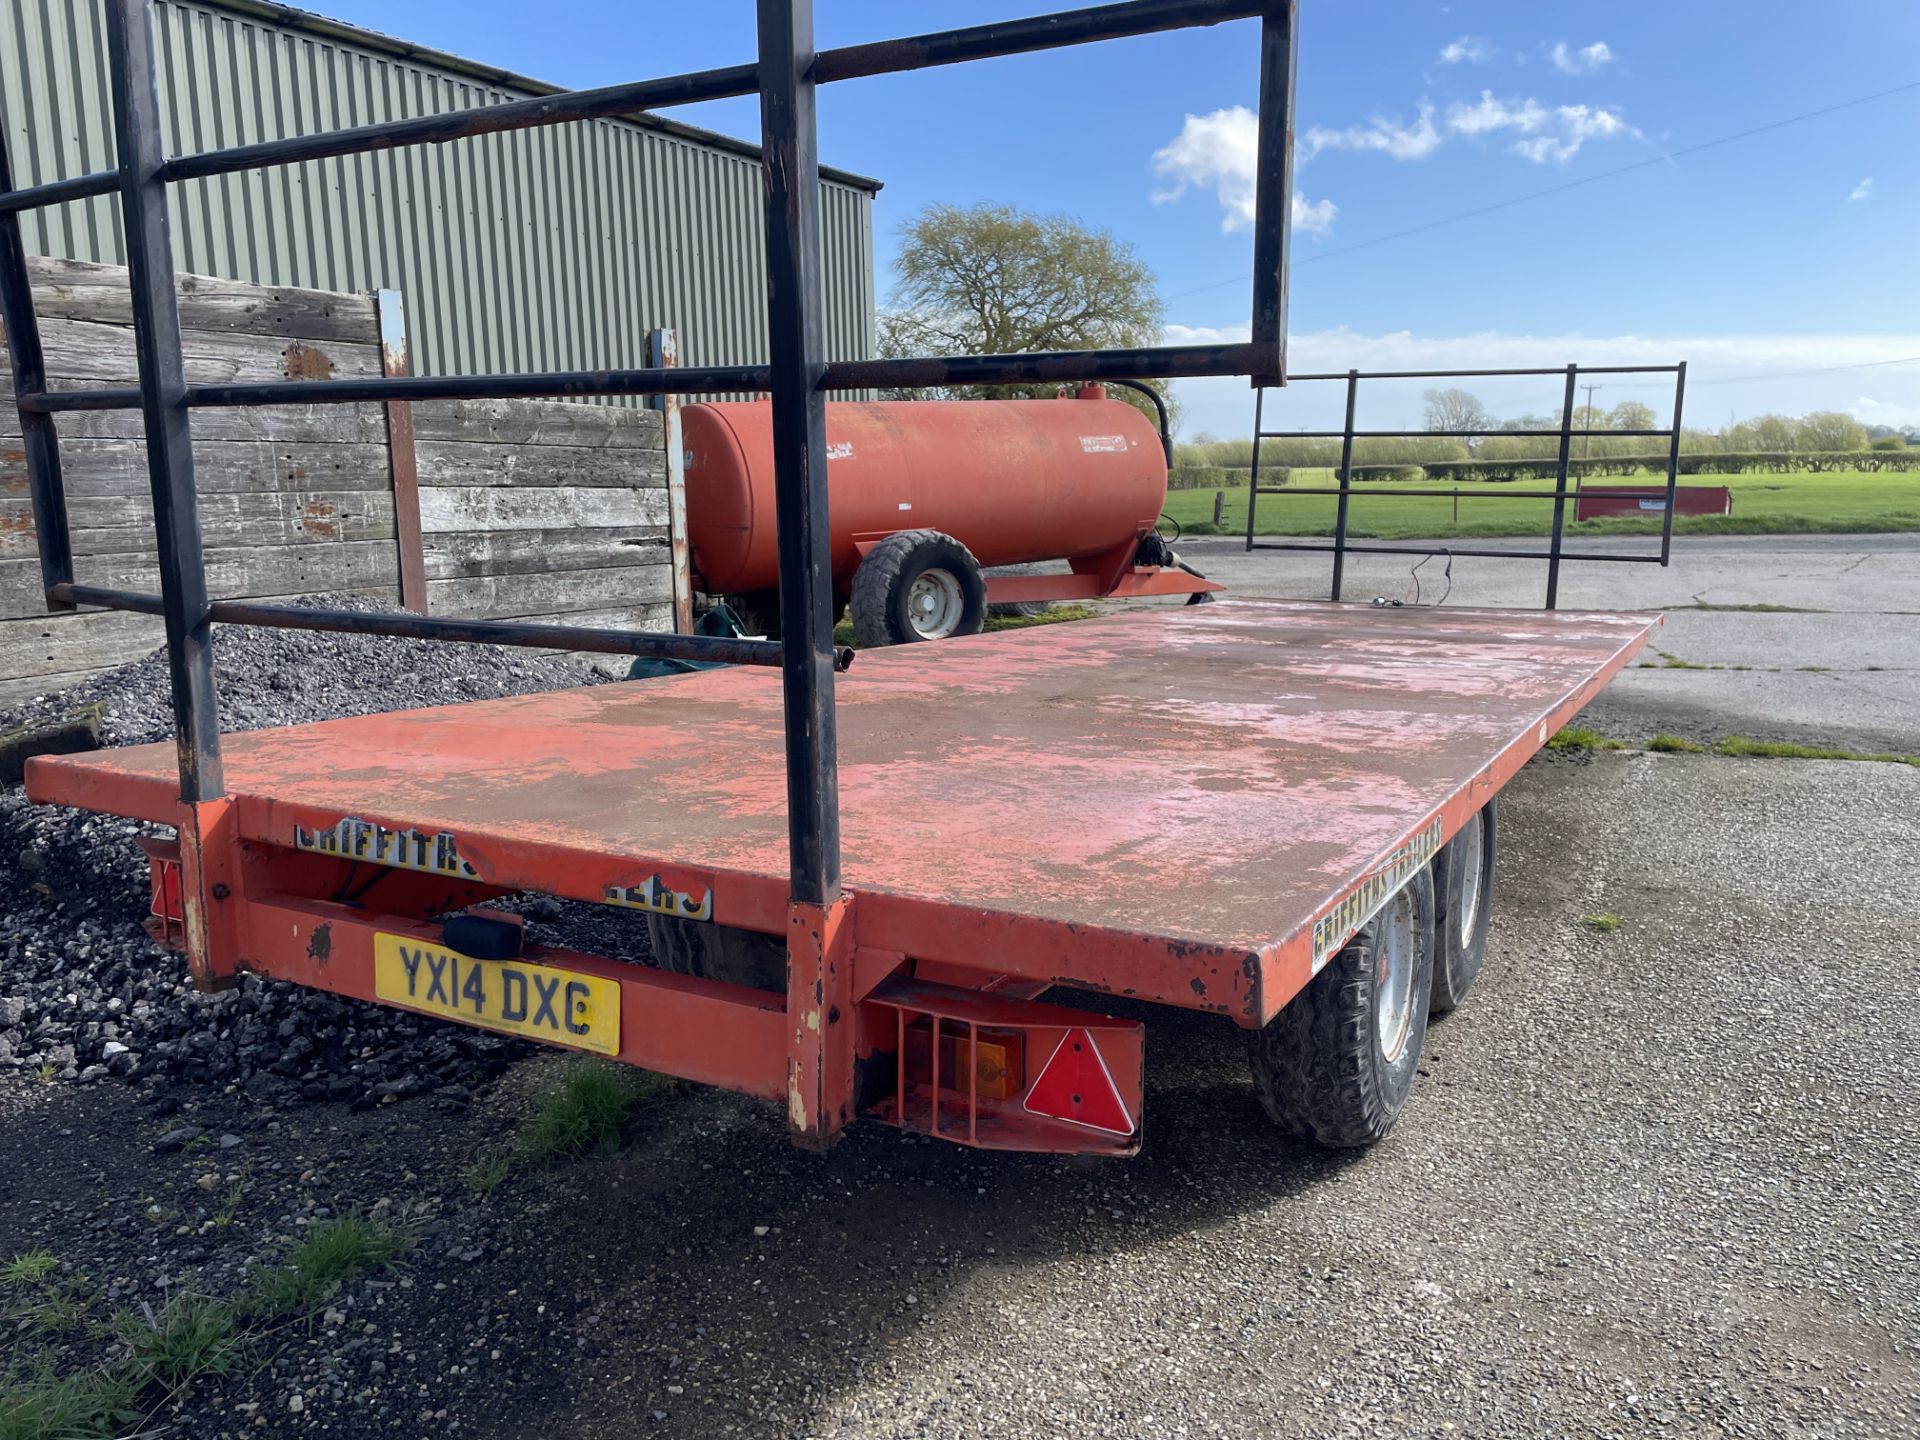 1995 Griffiths 8 ton 25' Bale Trailer with ladders front and rear - owned from new - Subject to VAT - Bild 3 aus 3